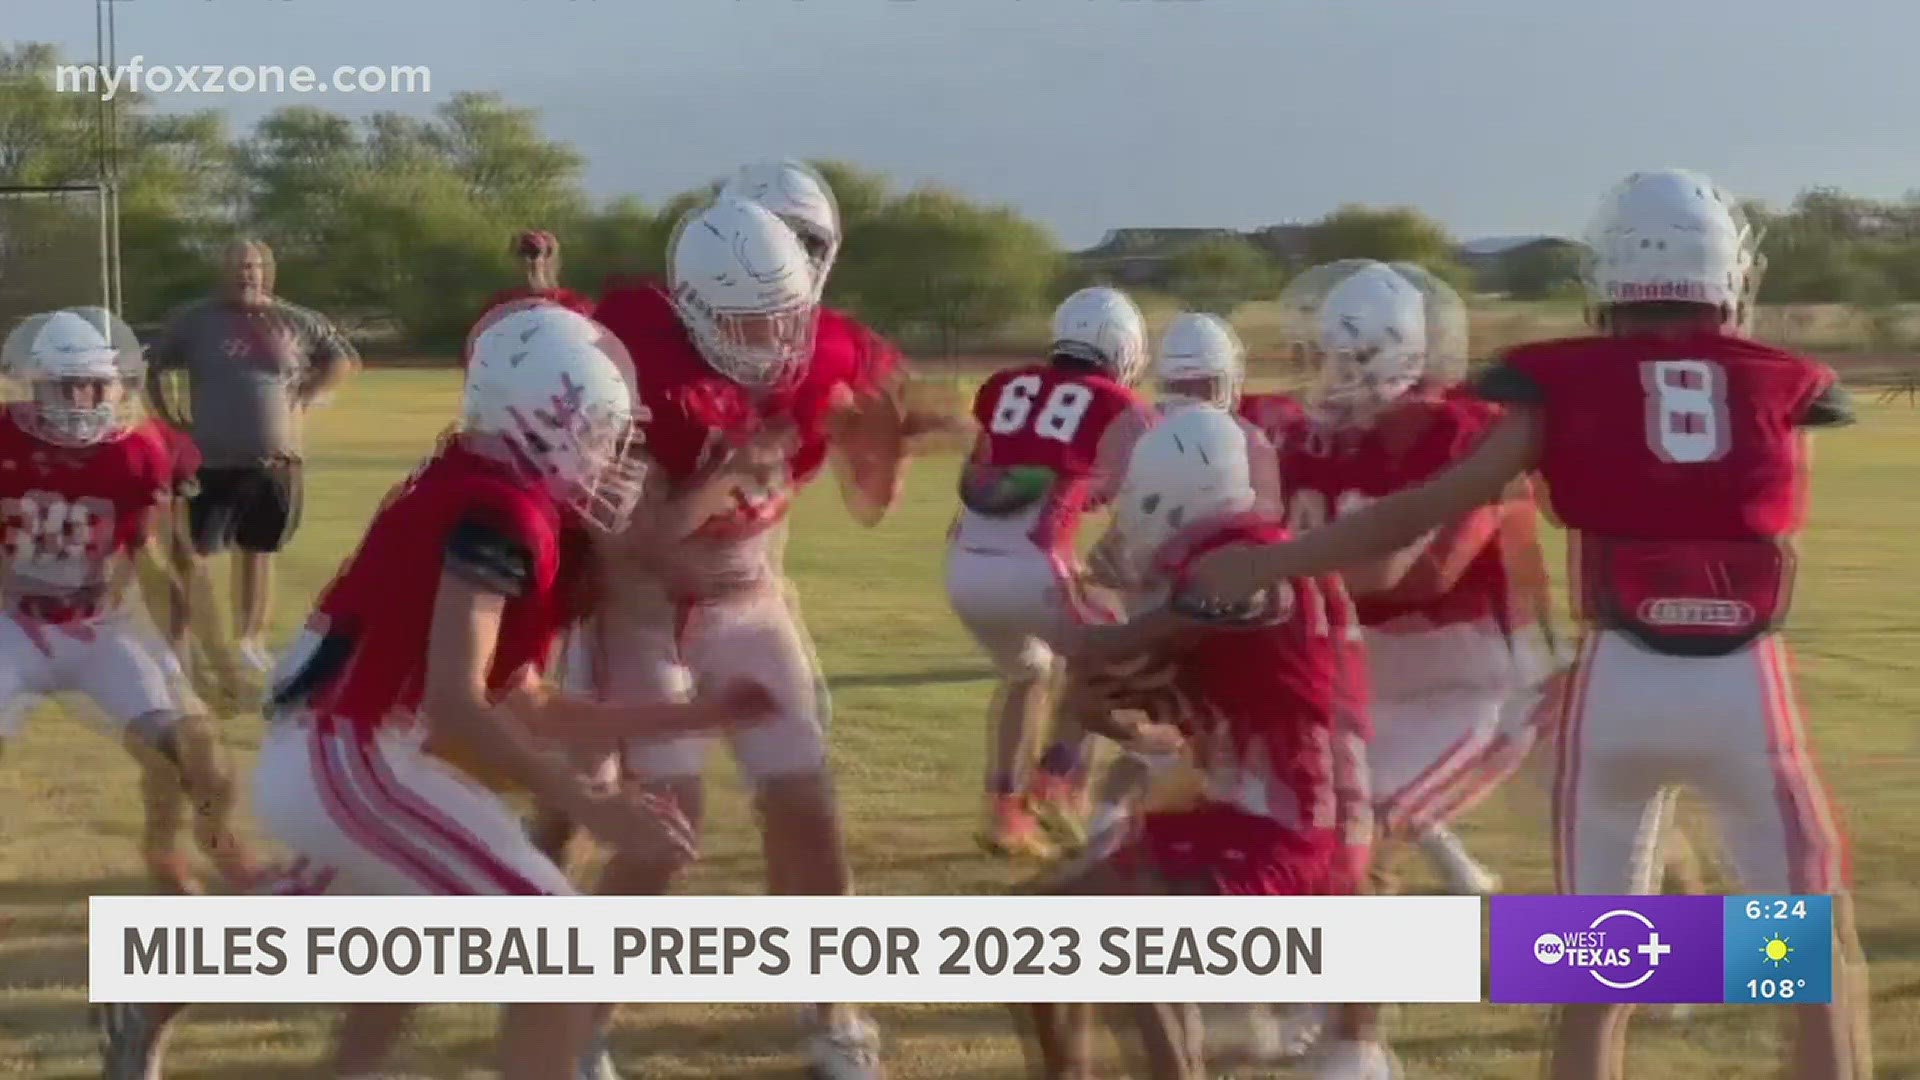 The Bulldogs will face a tougher district this season but will look to come out on top.